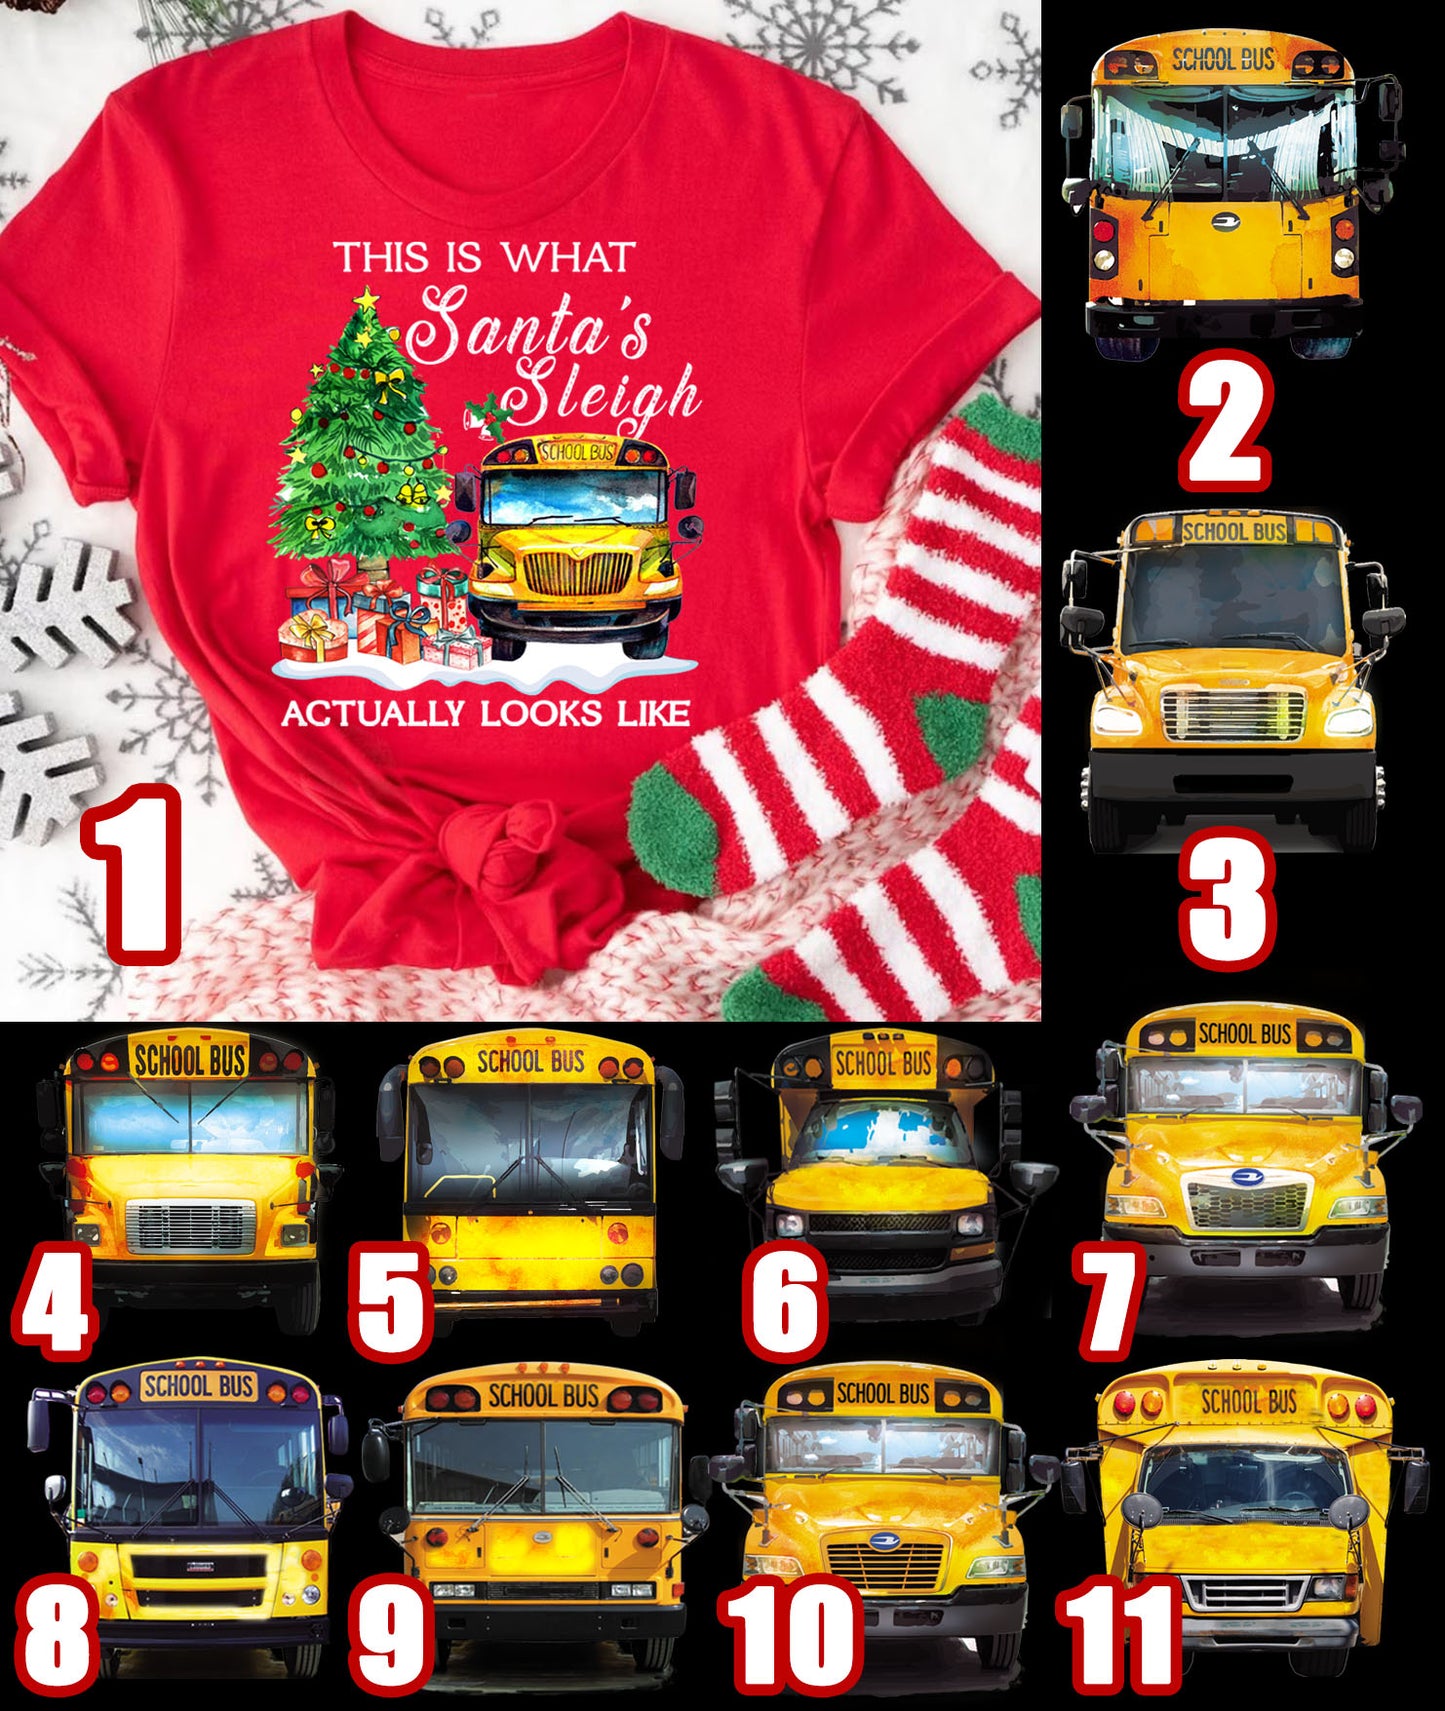 This is what Santa's sleigh actually looks like with all type school bus